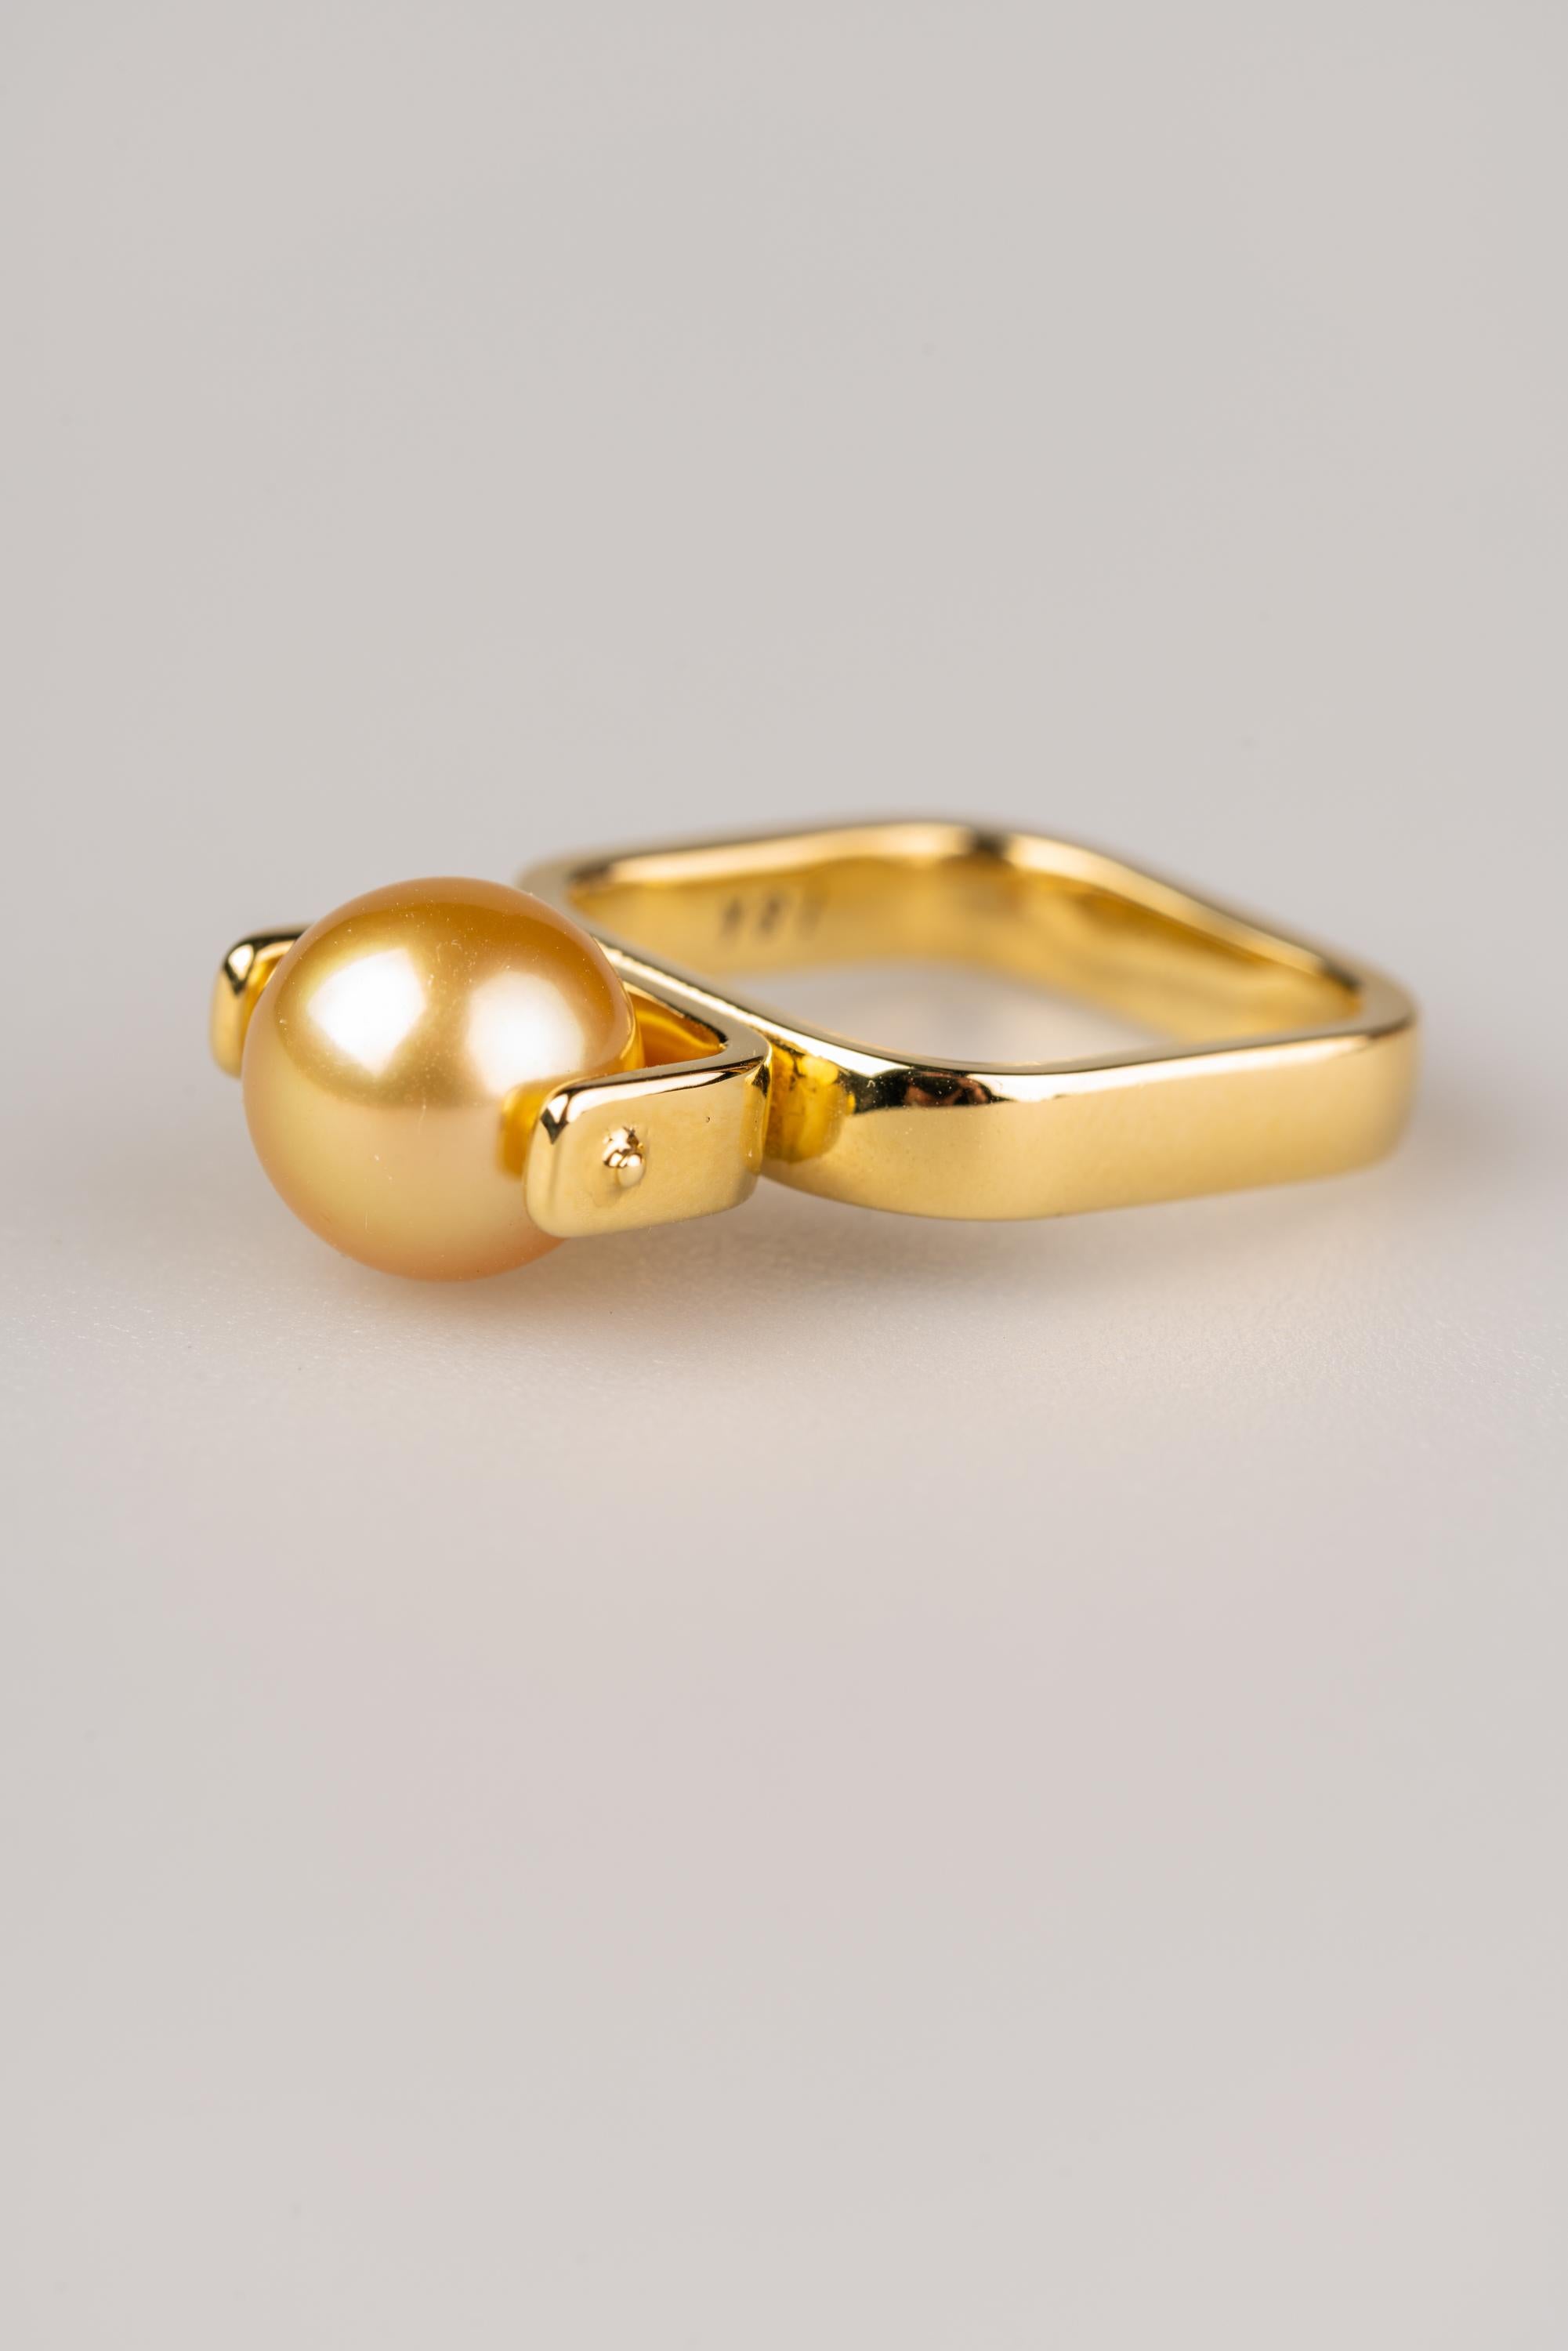 An 18k yellow gold ring with one 9mm South Sea Golden pearl. Ring size 7. This ring was made and designed by llyn strong.